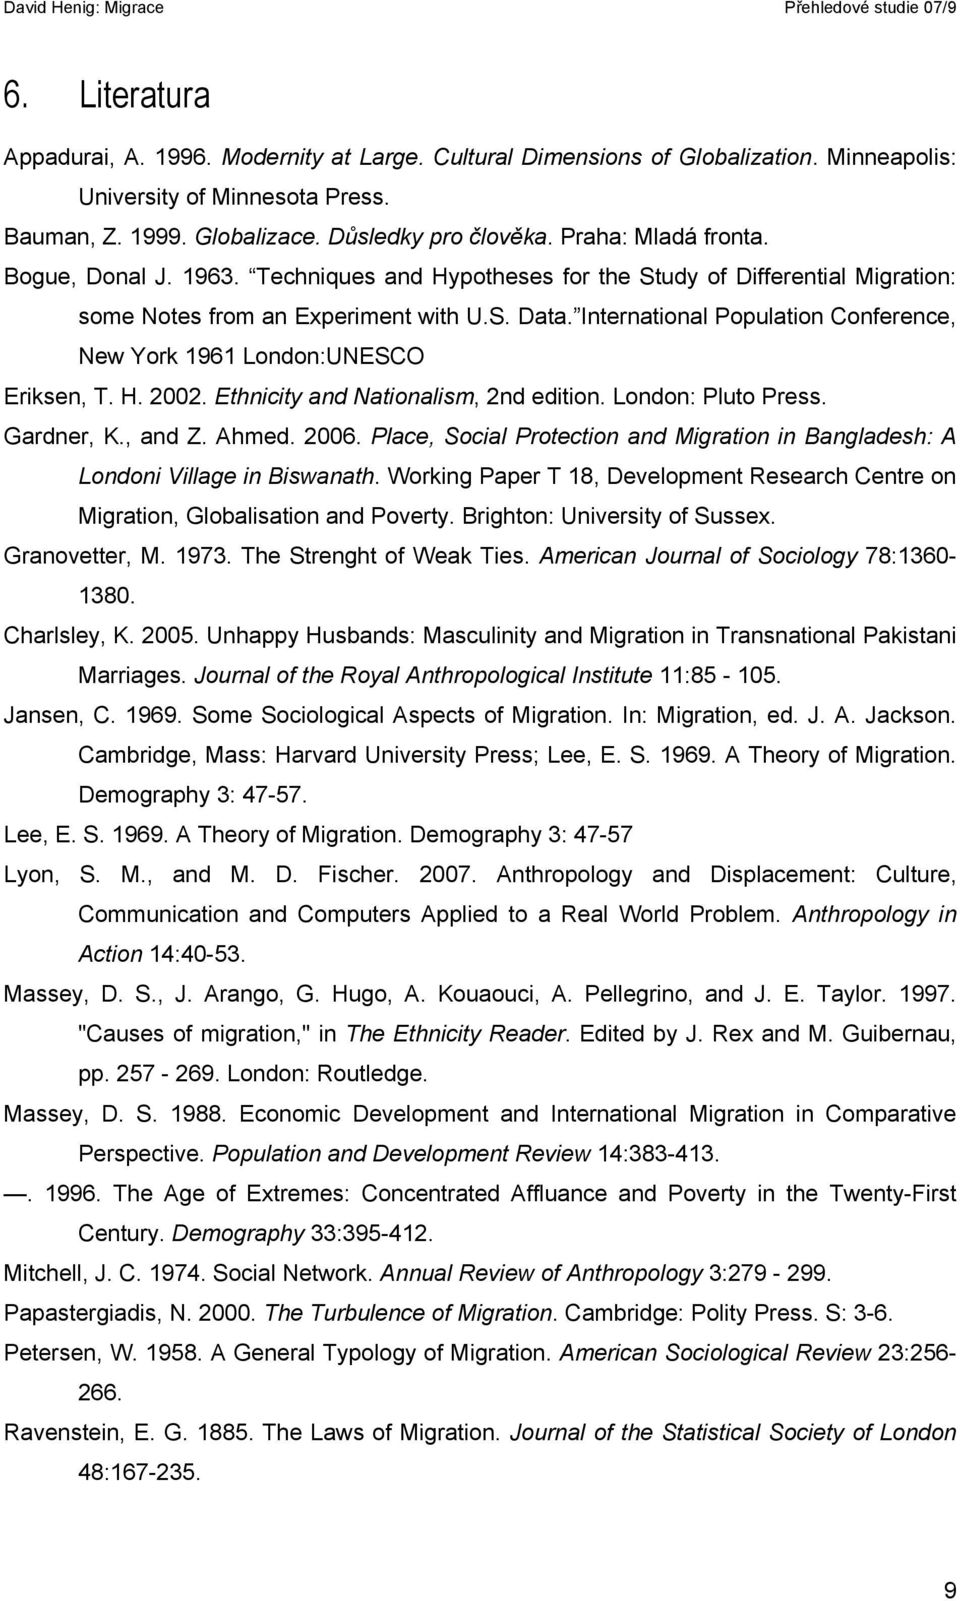 International Population Conference, New York 1961 London:UNESCO Eriksen, T. H. 2002. Ethnicity and Nationalism, 2nd edition. London: Pluto Press. Gardner, K., and Z. Ahmed. 2006.